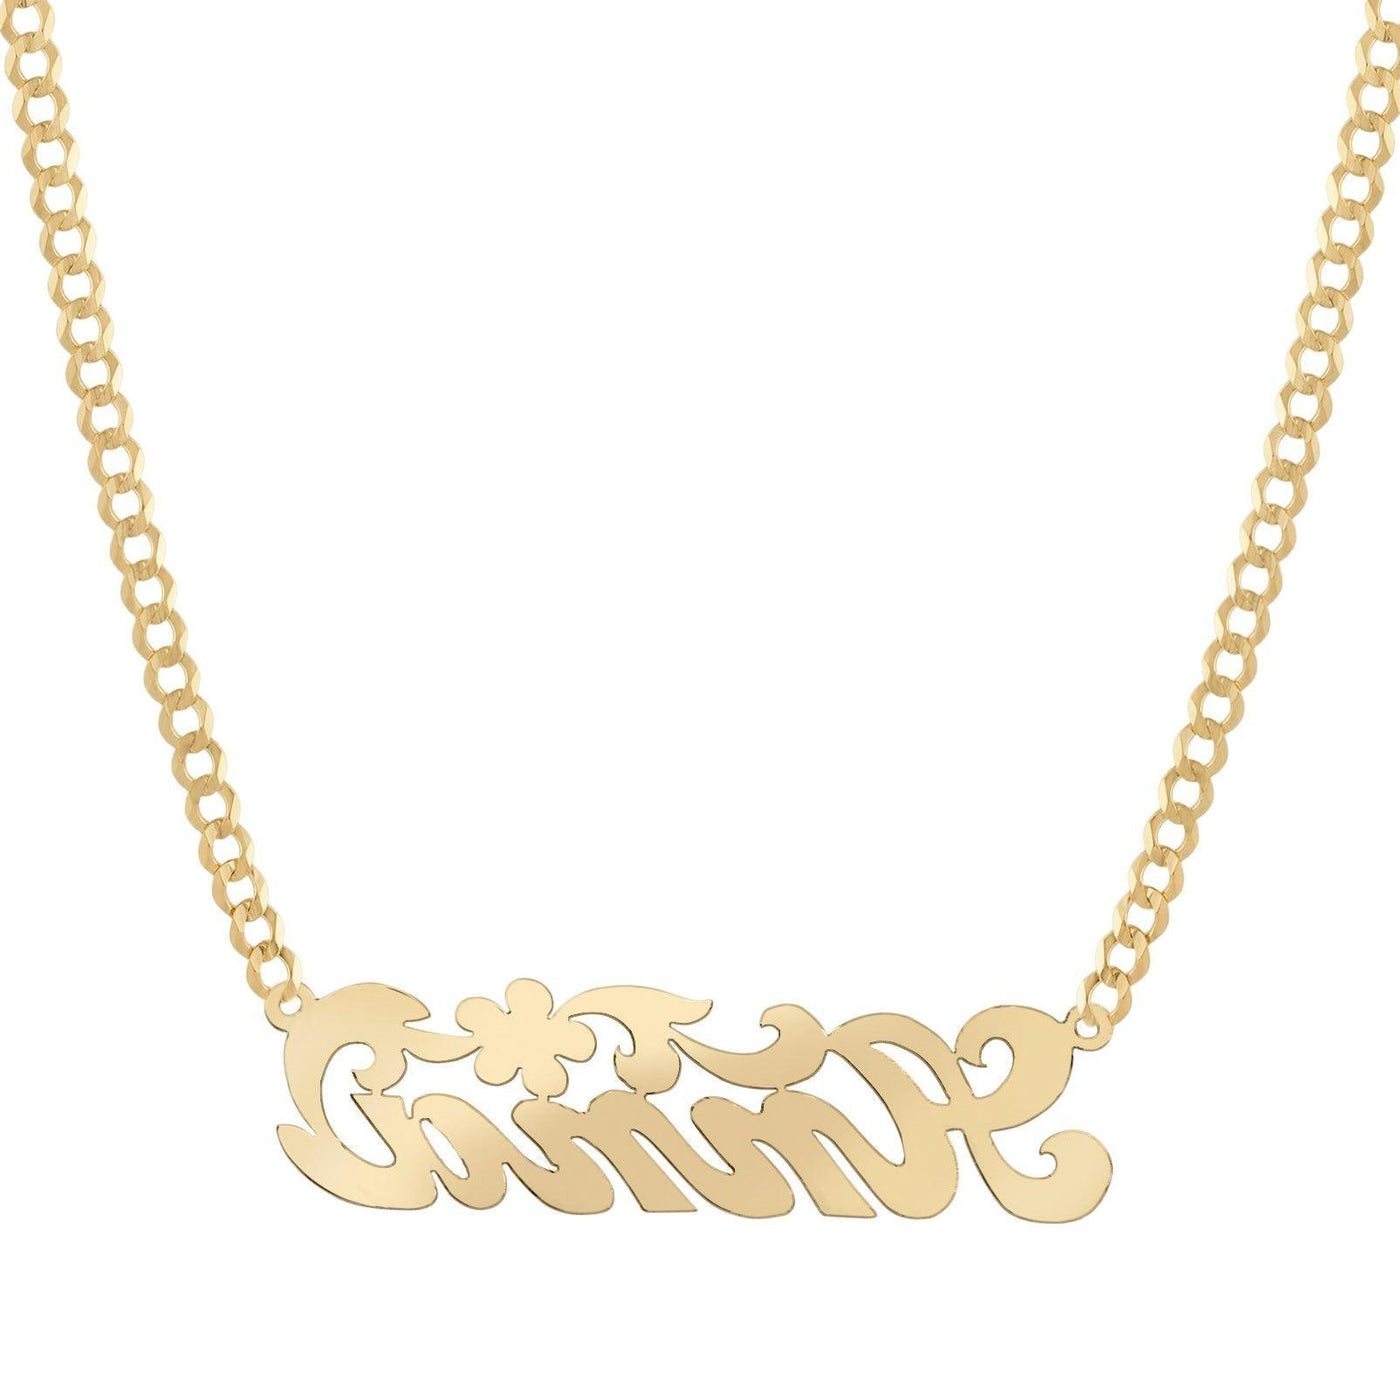 Ladies Script Name Plate Flower Ribbon Necklace 14K Gold - Style 121 - bayamjewelry